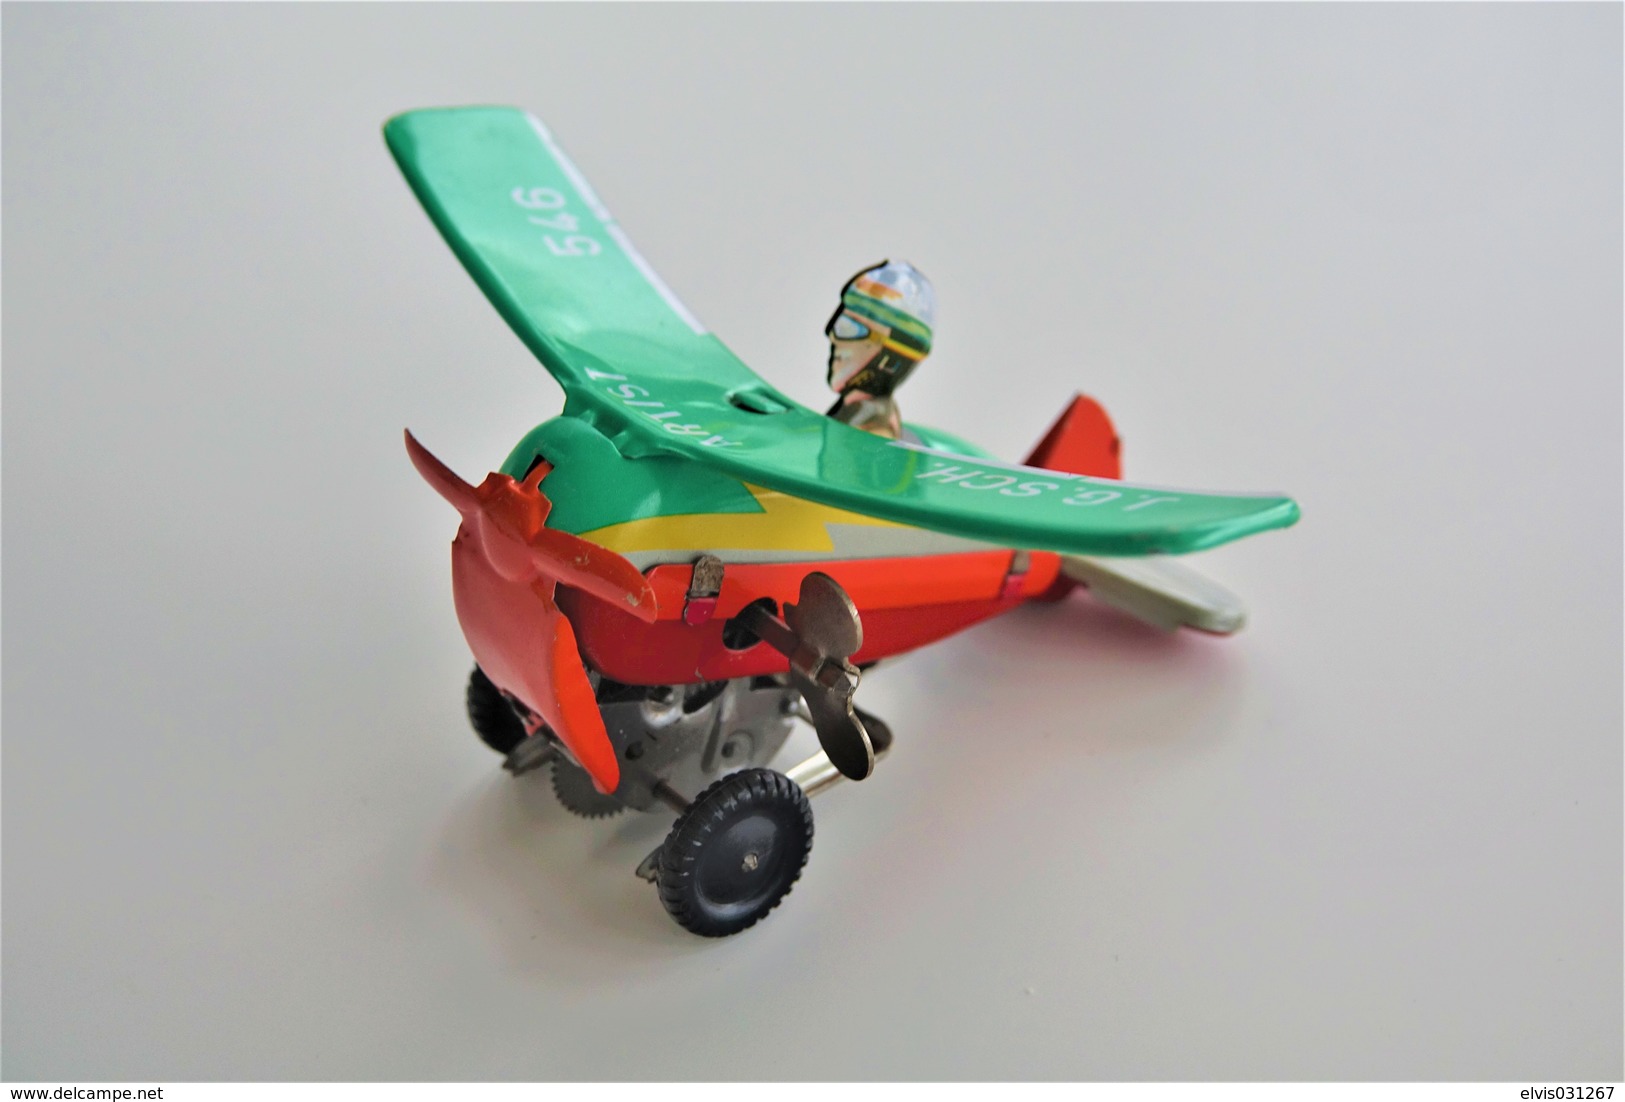 Vintage TIN TOY FLIPPING PLANE WIND UP  - Green J.G.SCH 546 ARTIST  - 8.5cm - WEST GERMANY - 1960 - Friction - Collectors Et Insolites - Toutes Marques